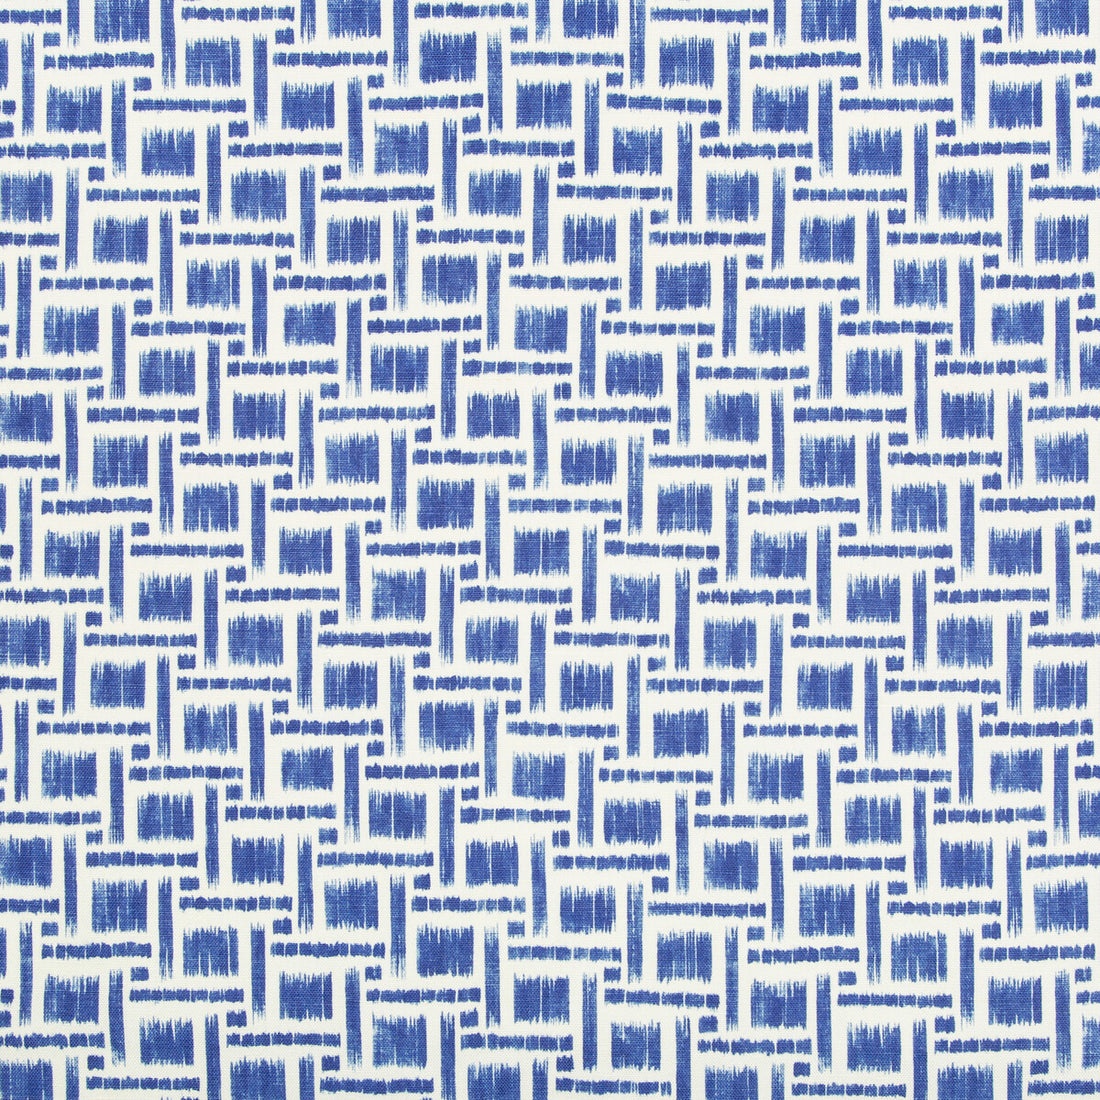 Mira Print fabric in blue color - pattern 8019135.5.0 - by Brunschwig &amp; Fils in the Summer Palace collection